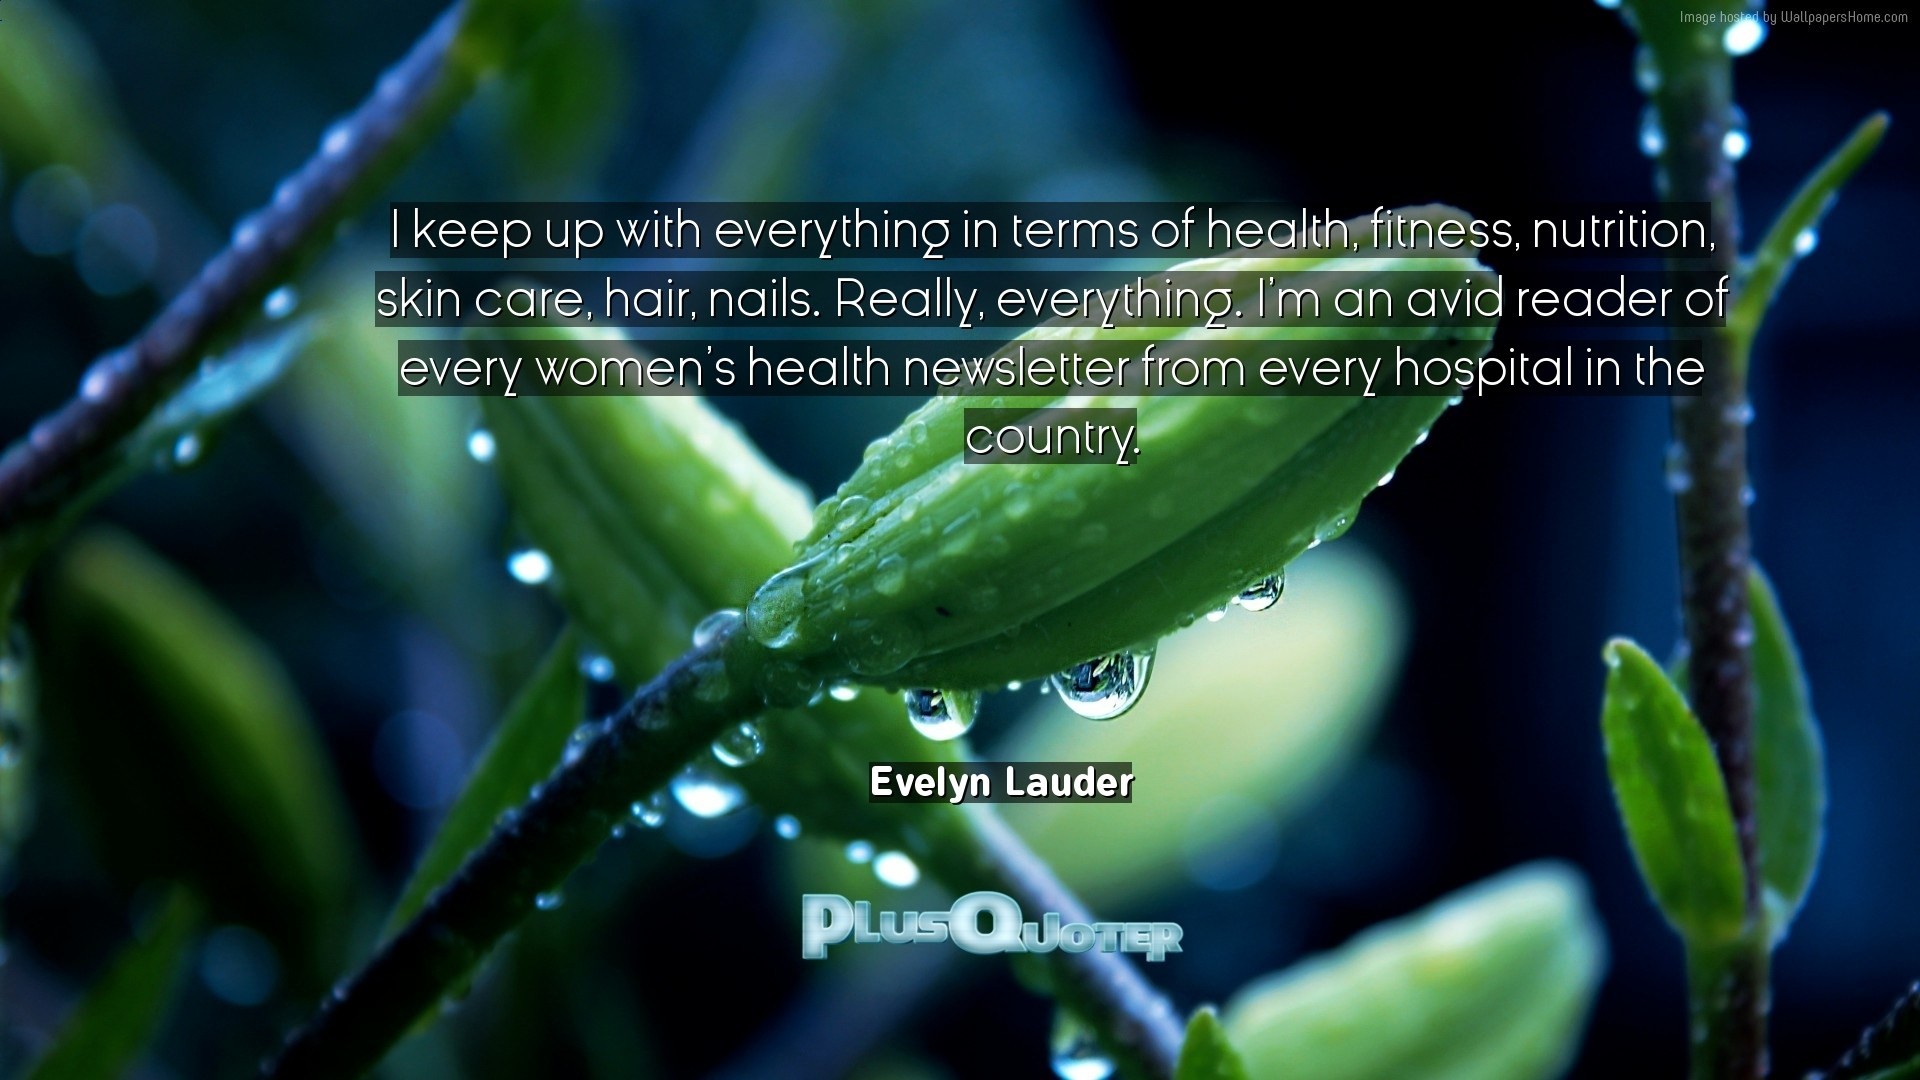 1920x1080 Download Wallpaper with inspirational Quotes- "I keep up with everything in  terms of health